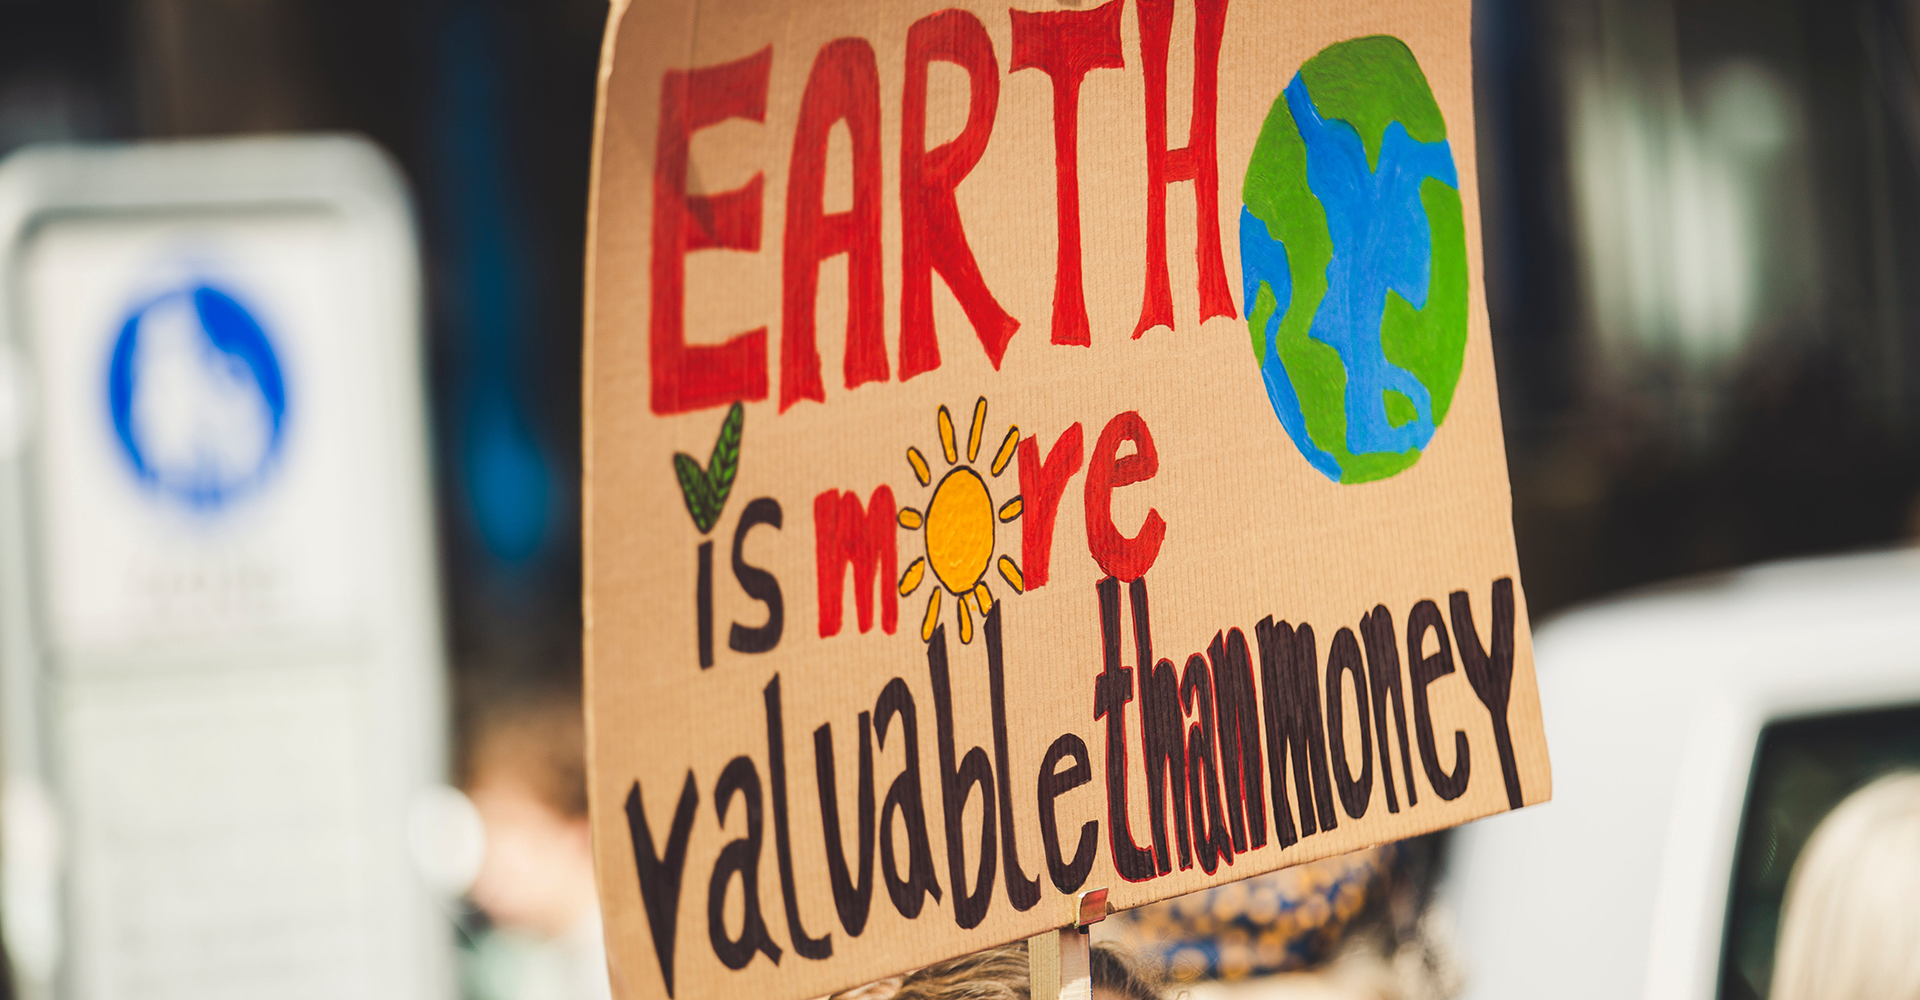 A protest sign stating 'Earth is more valuable than money'